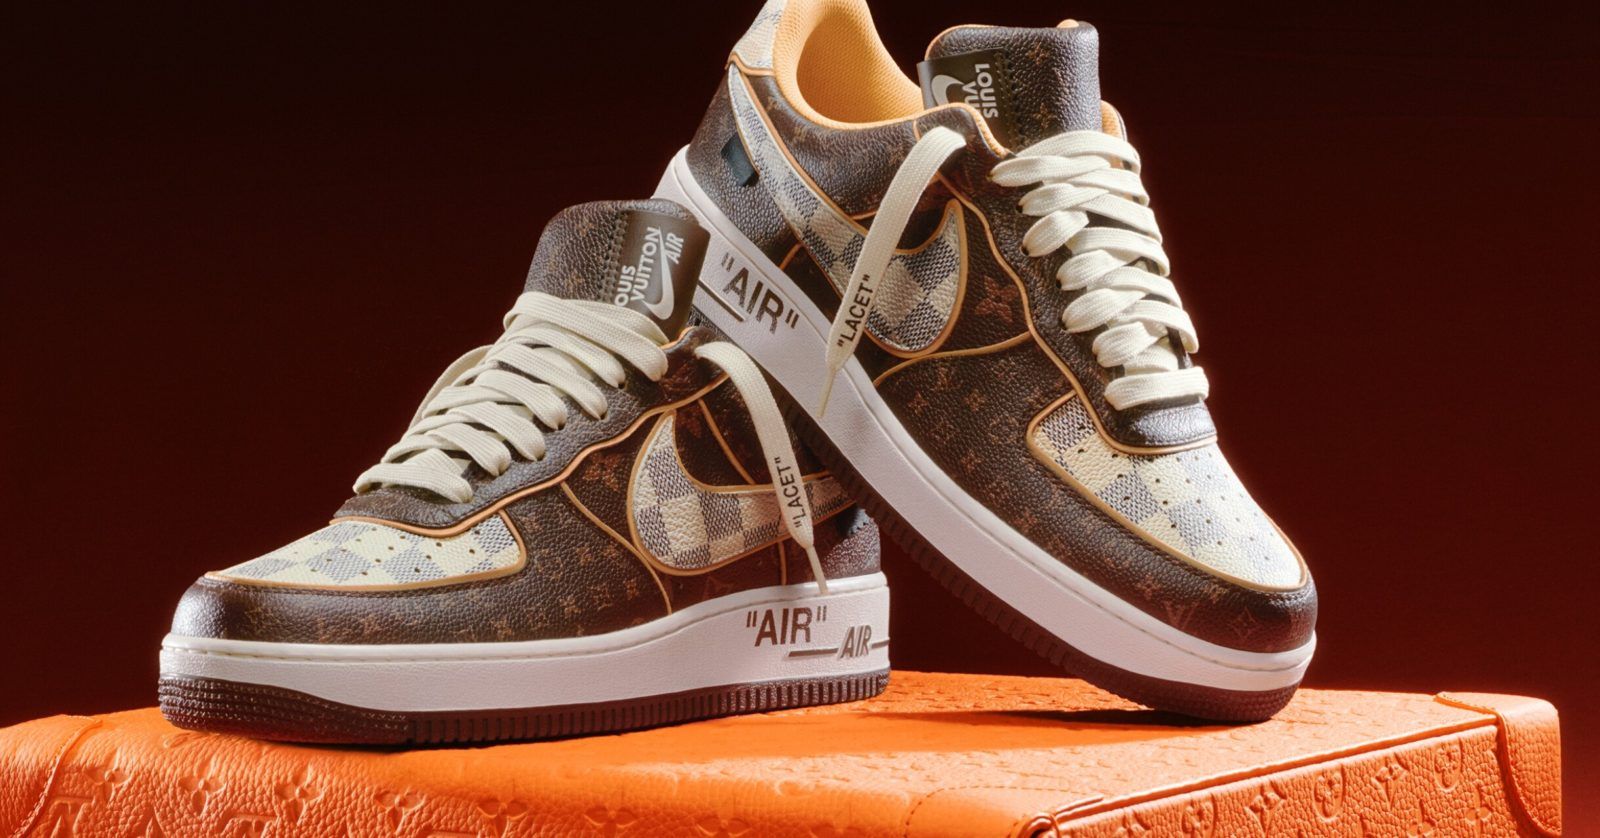 Take a Closer Look at Virgil Abloh's Louis Vuitton Sneakers